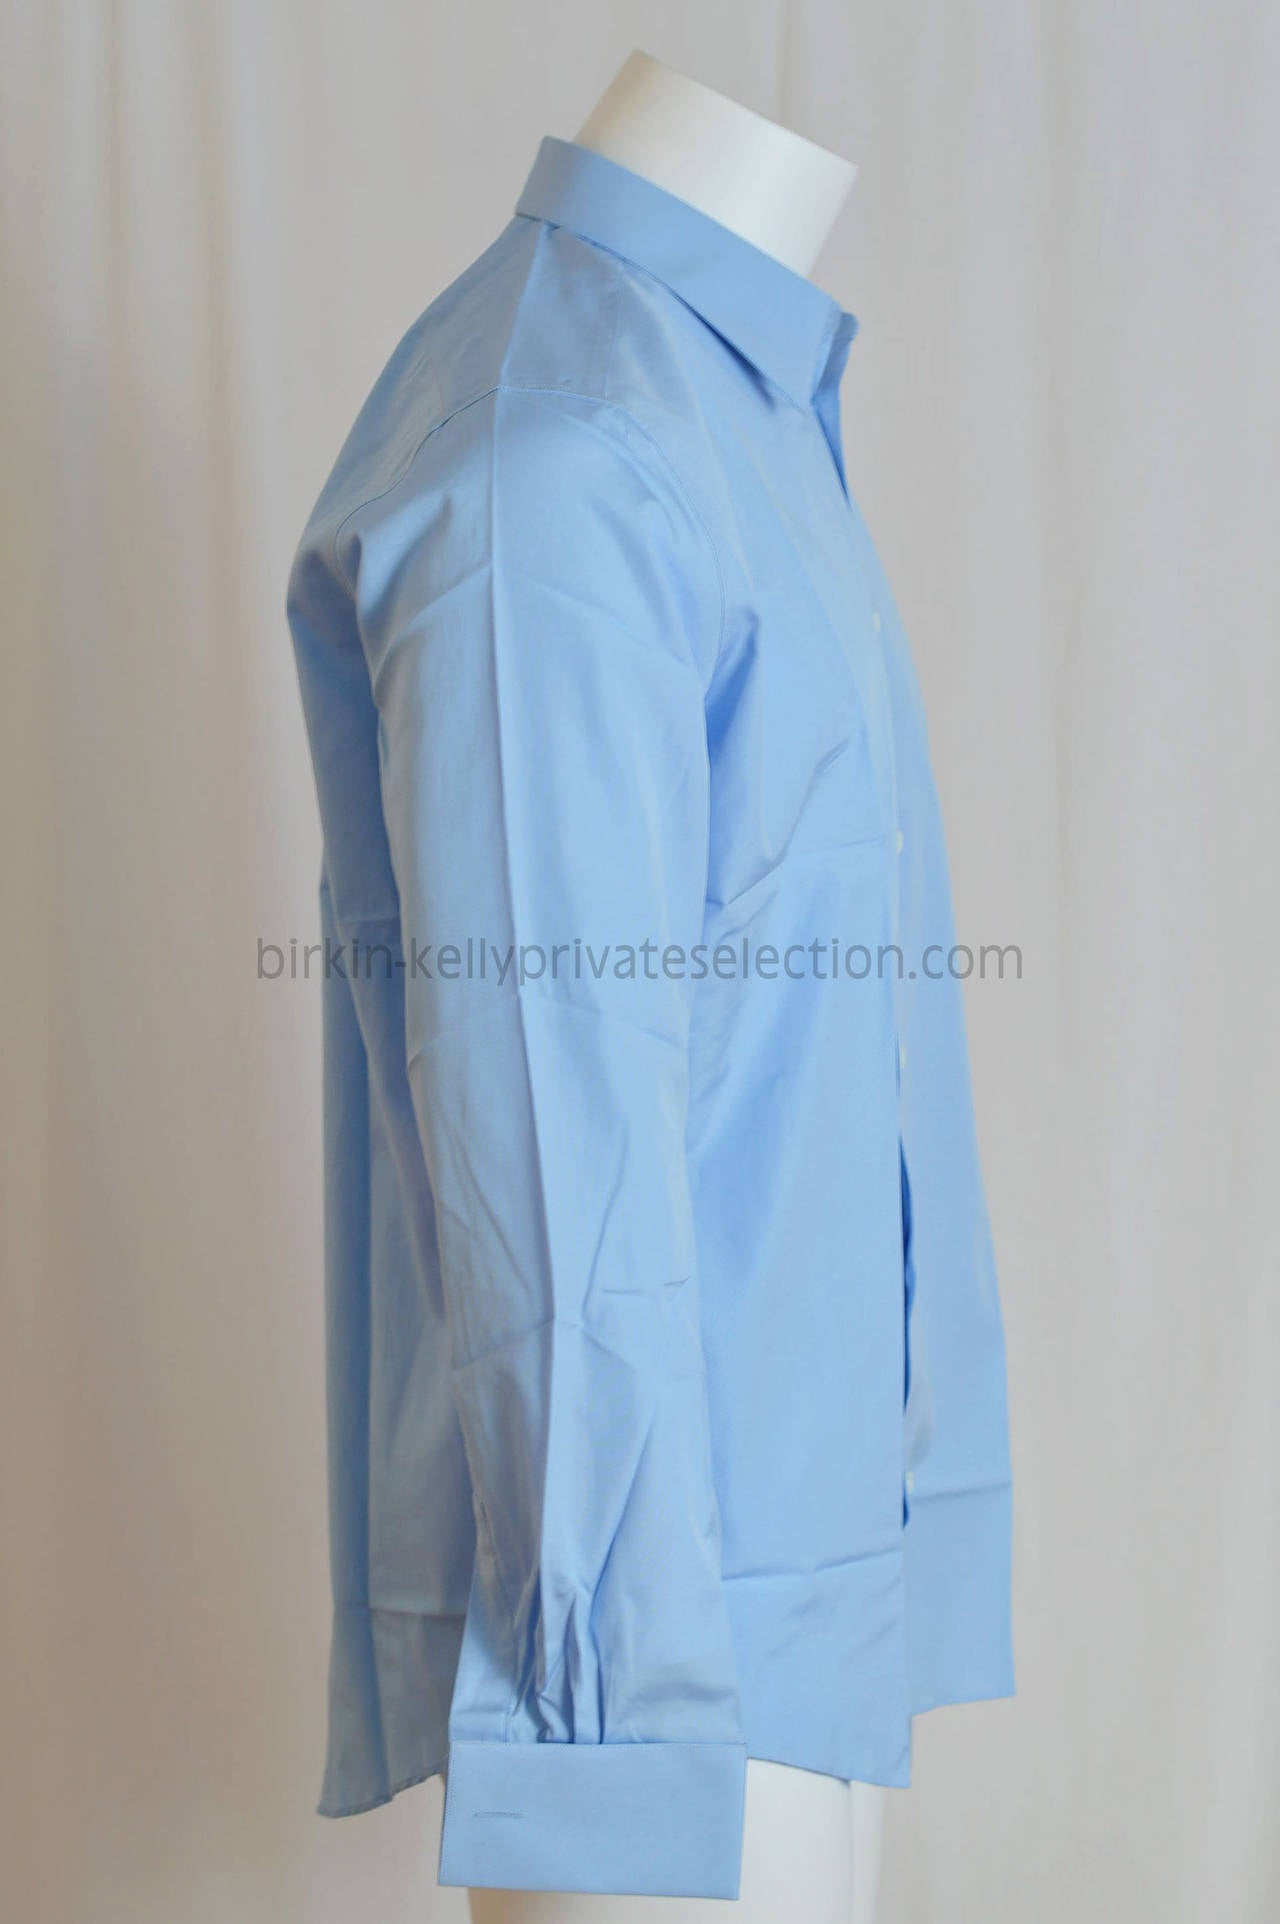 HERMES Shirt Ajustee Col Droite Cotton Poplin 42 Light Blue 2015.

Pre-owned and never used.

Bought it in Hermes store in 2015.

Composition; 100% Cotton.

Size; 42.

Color; Bleu Pale.

Model; Ajustee Col Droite.

-Original